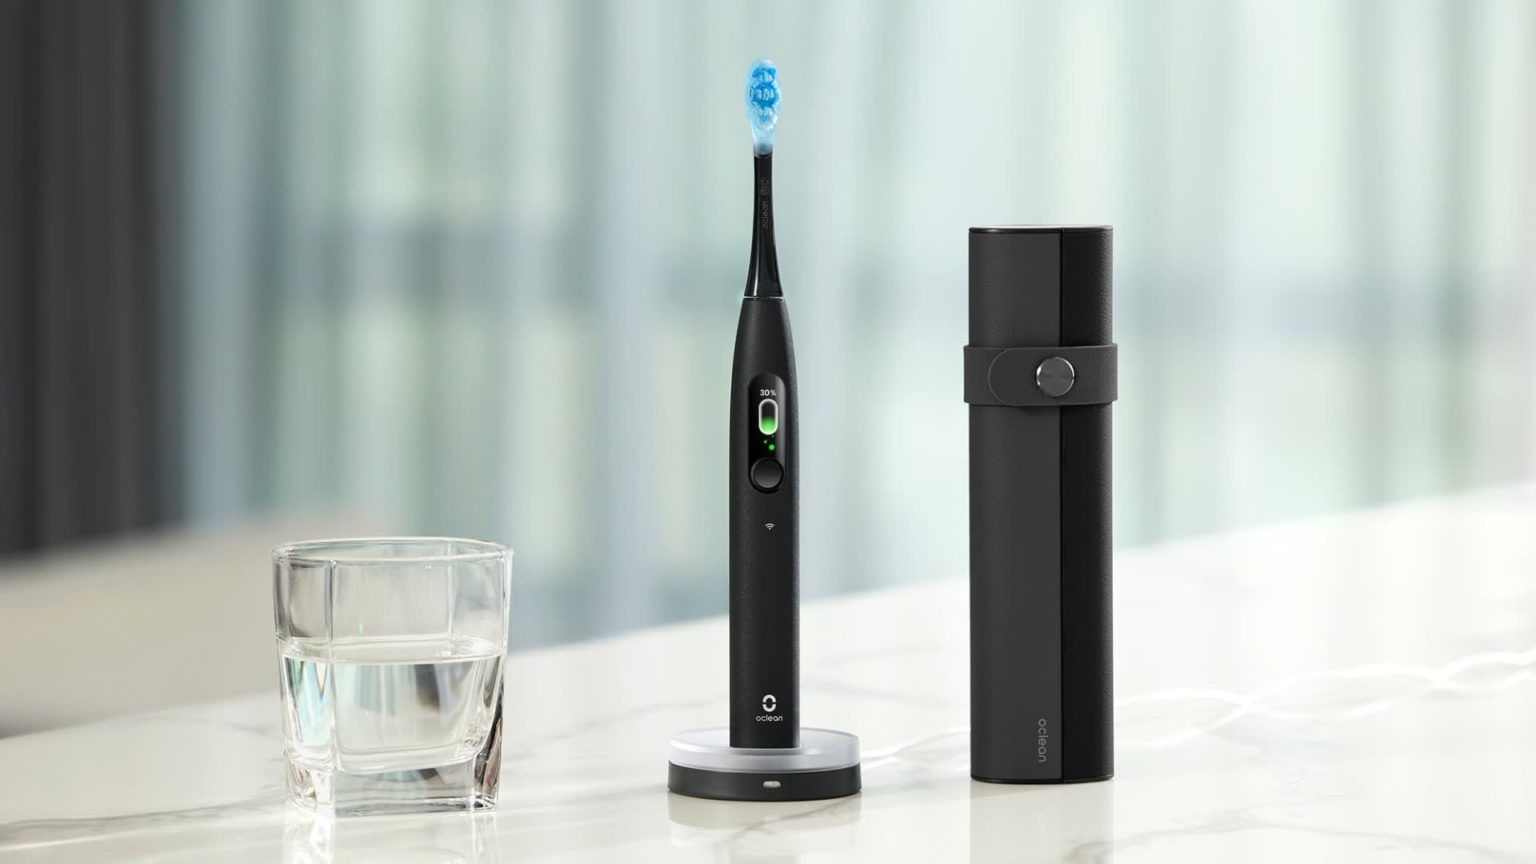 Hackers could have enslaved 3 million smart toothbrushes for DDoS attack on company